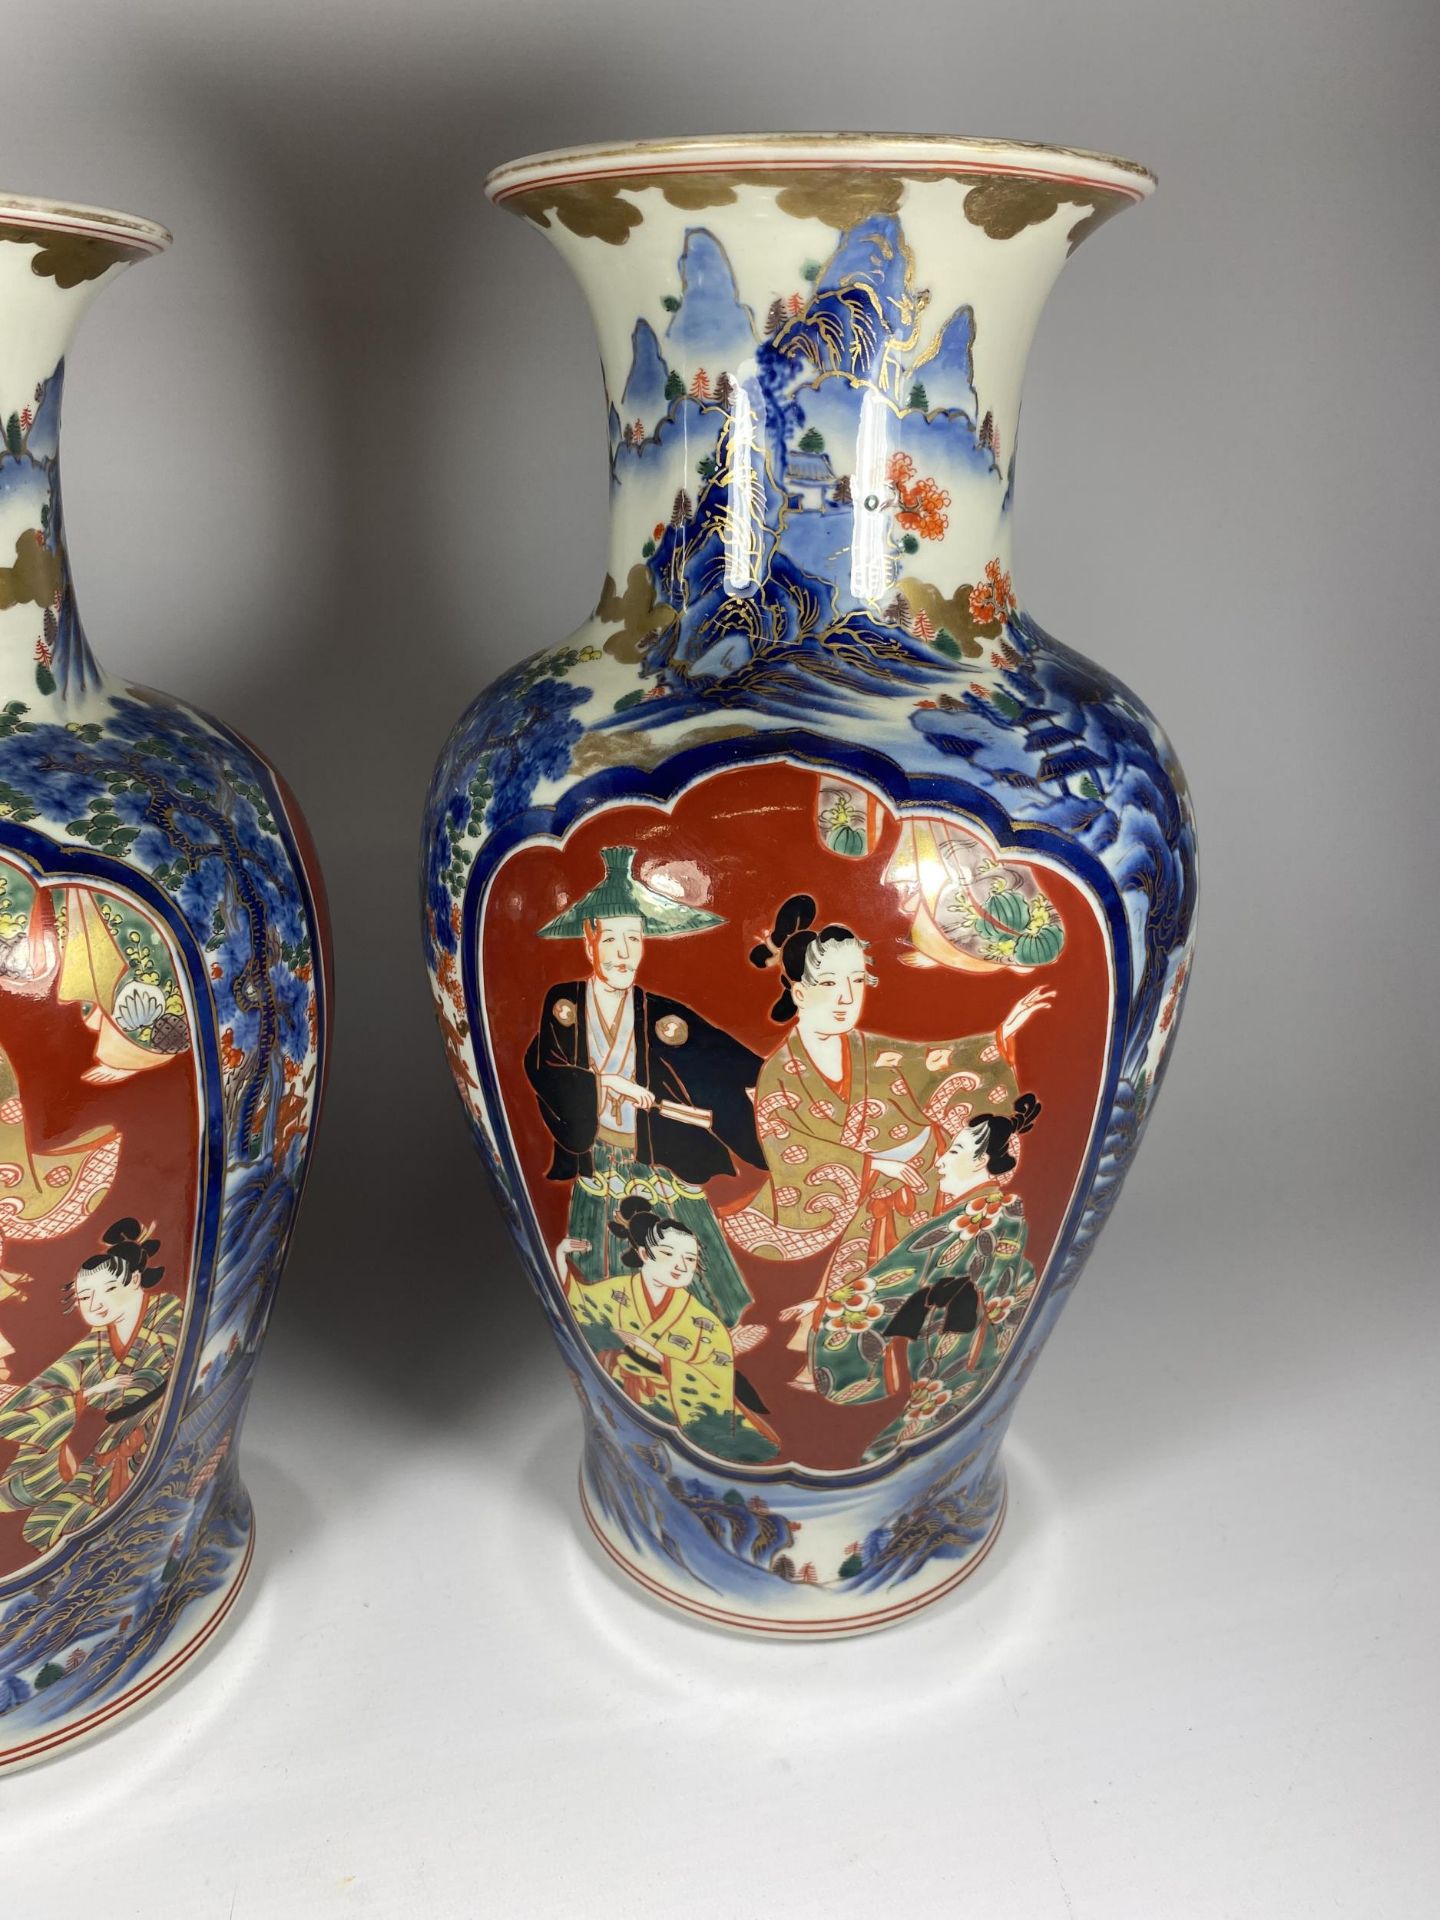 A LARGE PAIR OF JAPANESE MEIJI PERIOD (1868-1912) VASES WITH FIGURAL PANELS ON A MOUNTAIN - Image 3 of 6